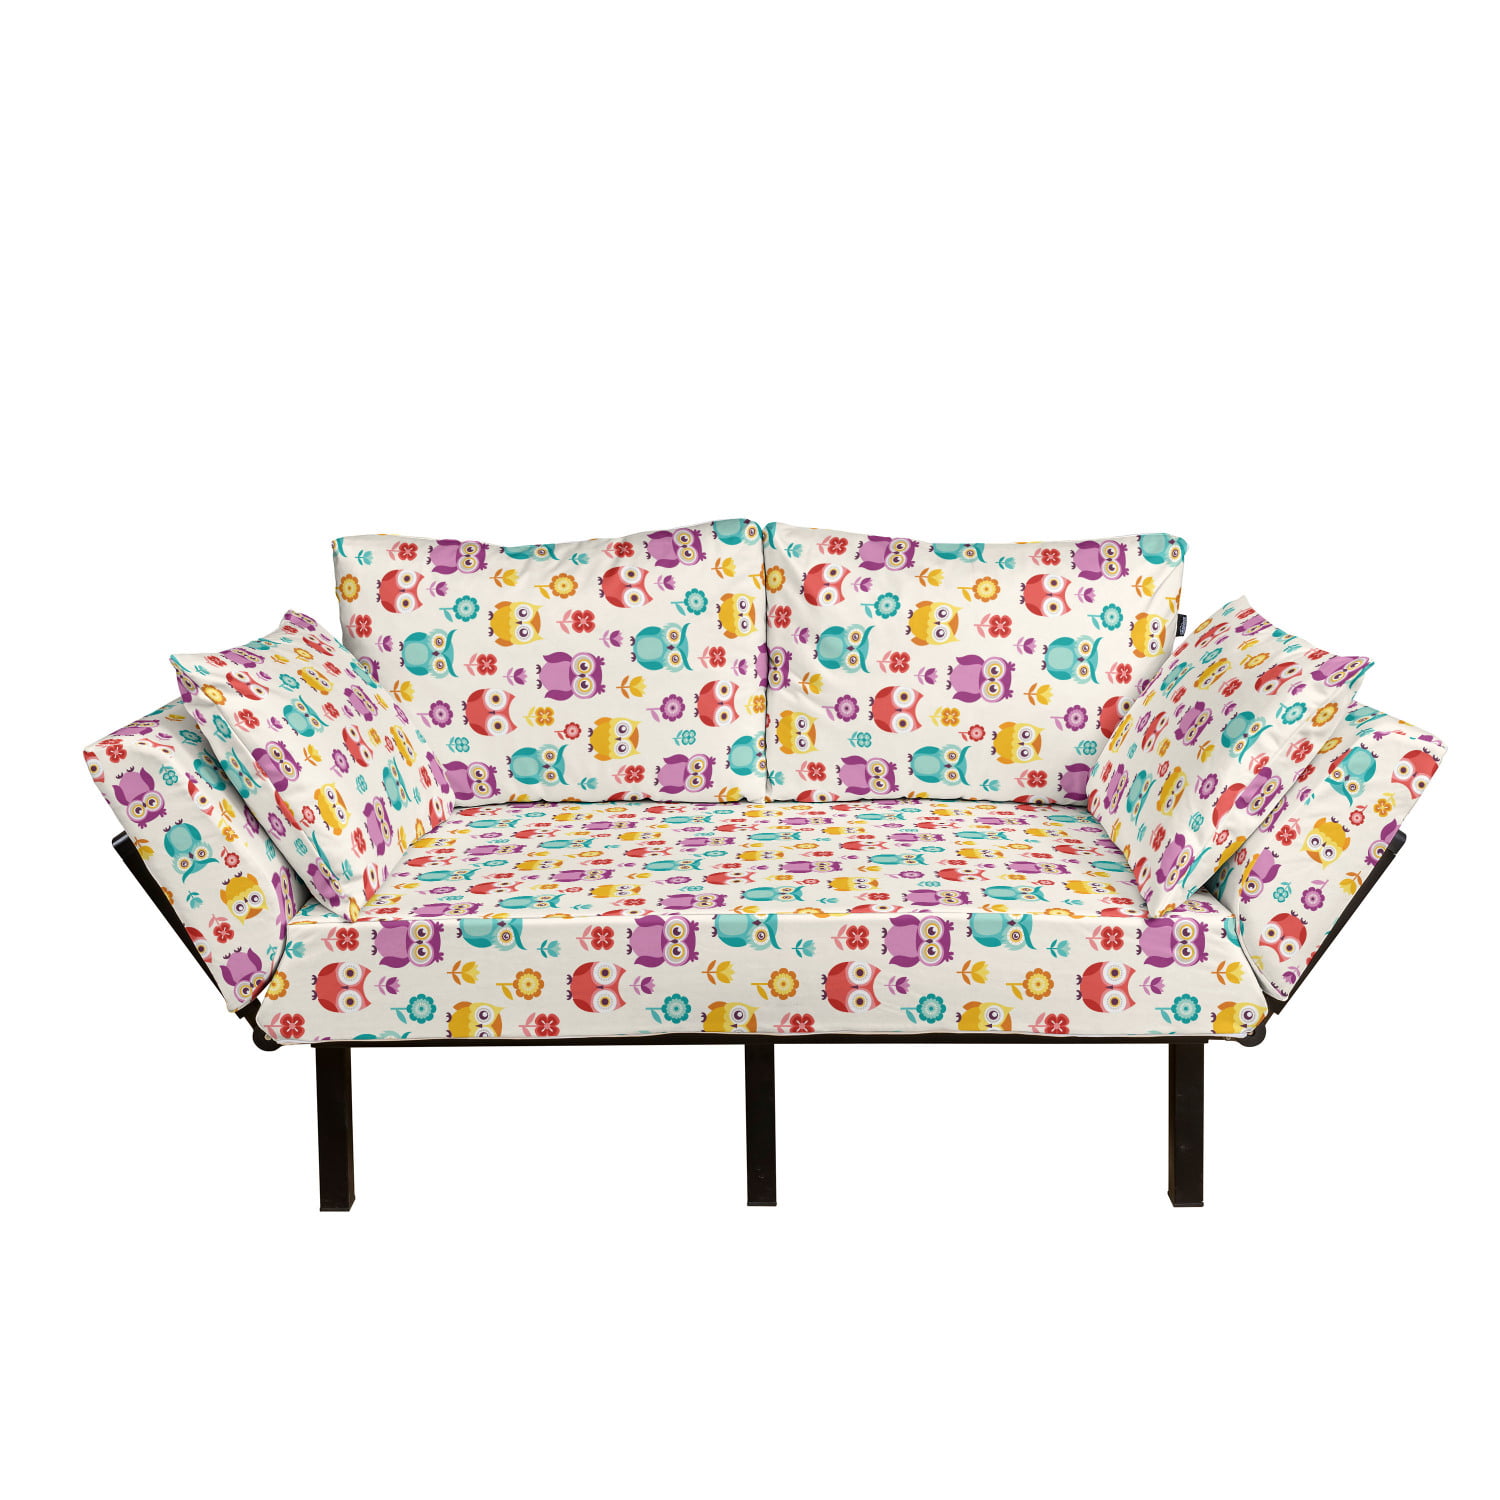 Owls Childrens Lily Foam Fold Out Sofa Bed Lounger